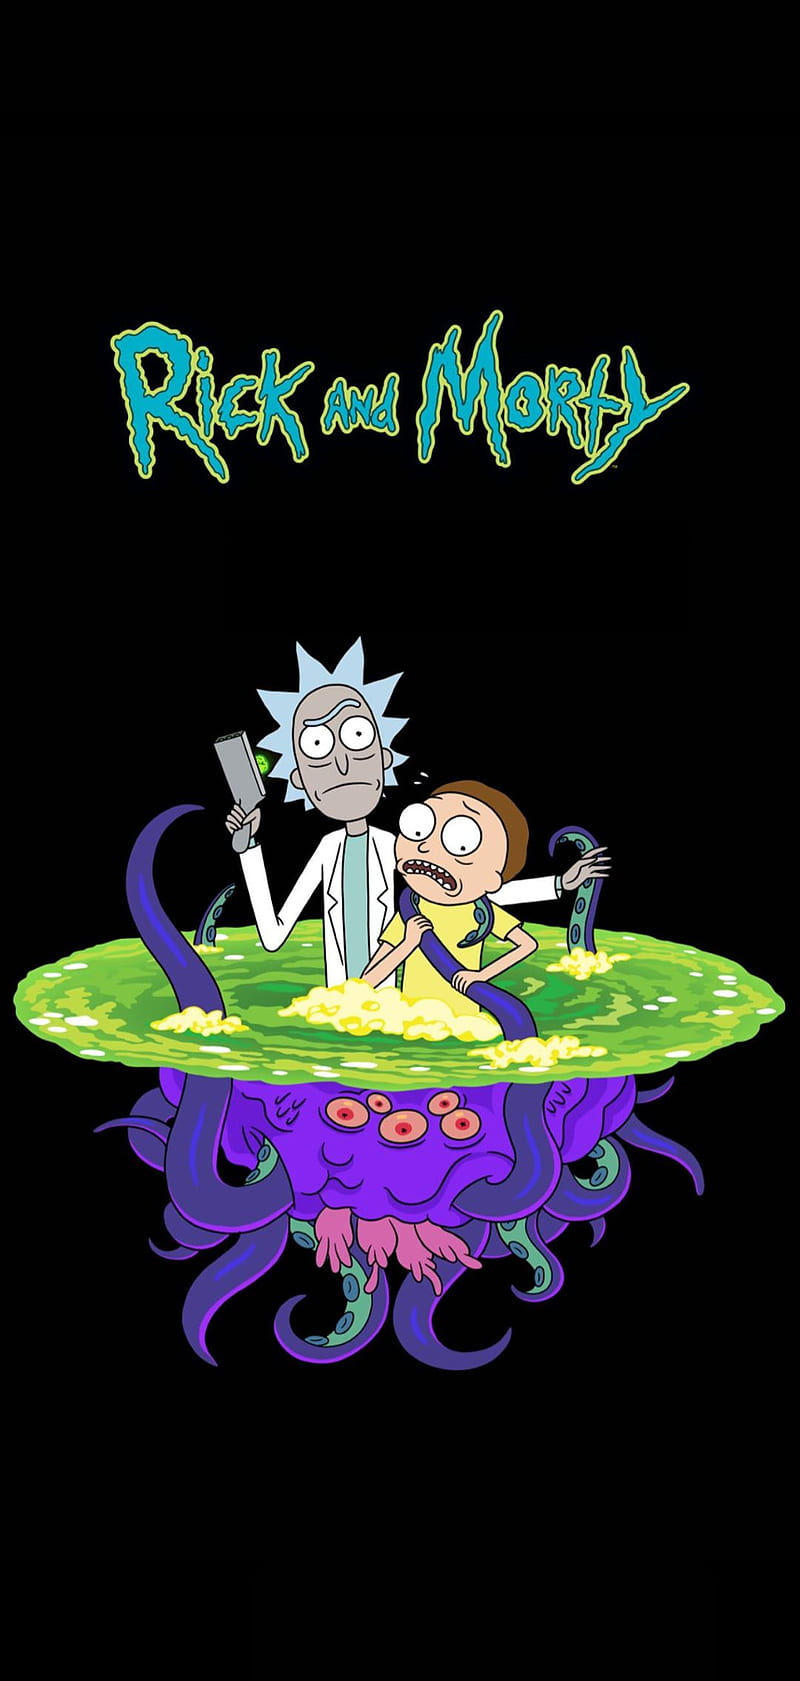 rick and morty 1080P 2k 4k HD wallpapers backgrounds free download   Rare Gallery  Page 4